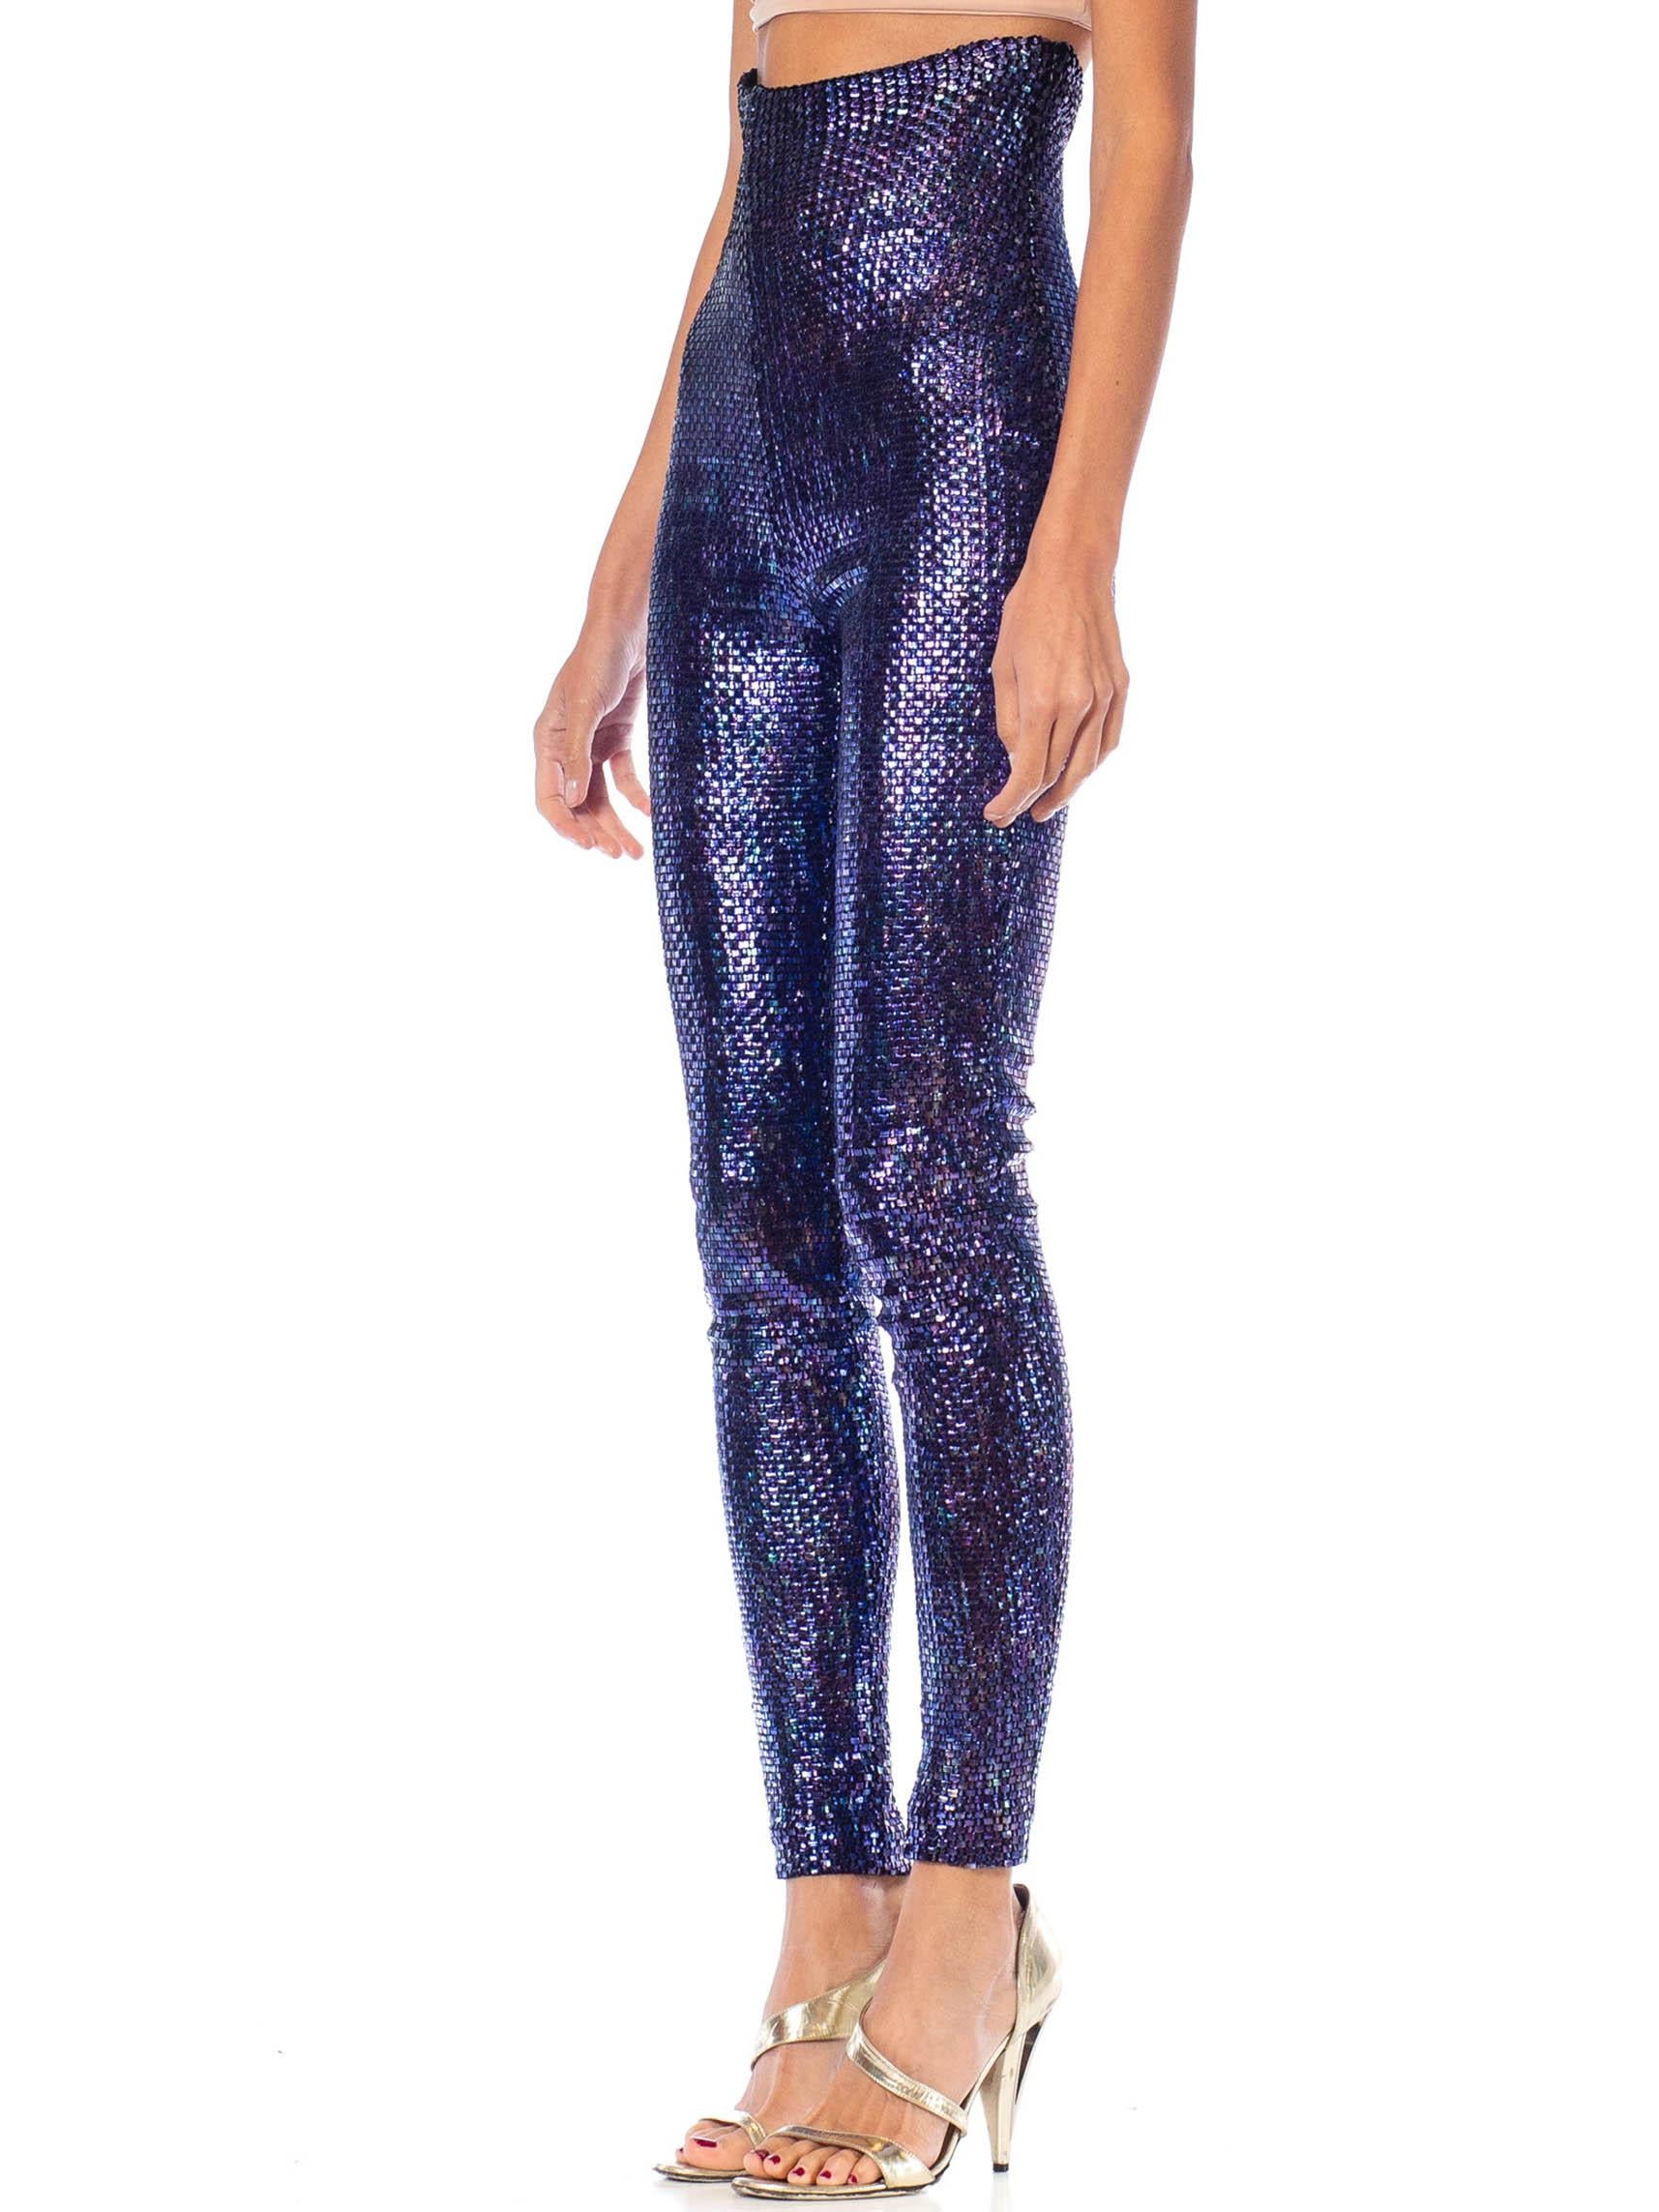 1990S ROMEO GIGLI Purple Viscose & Spandex Fully Sequined High-Waisted Pants For Sale 3